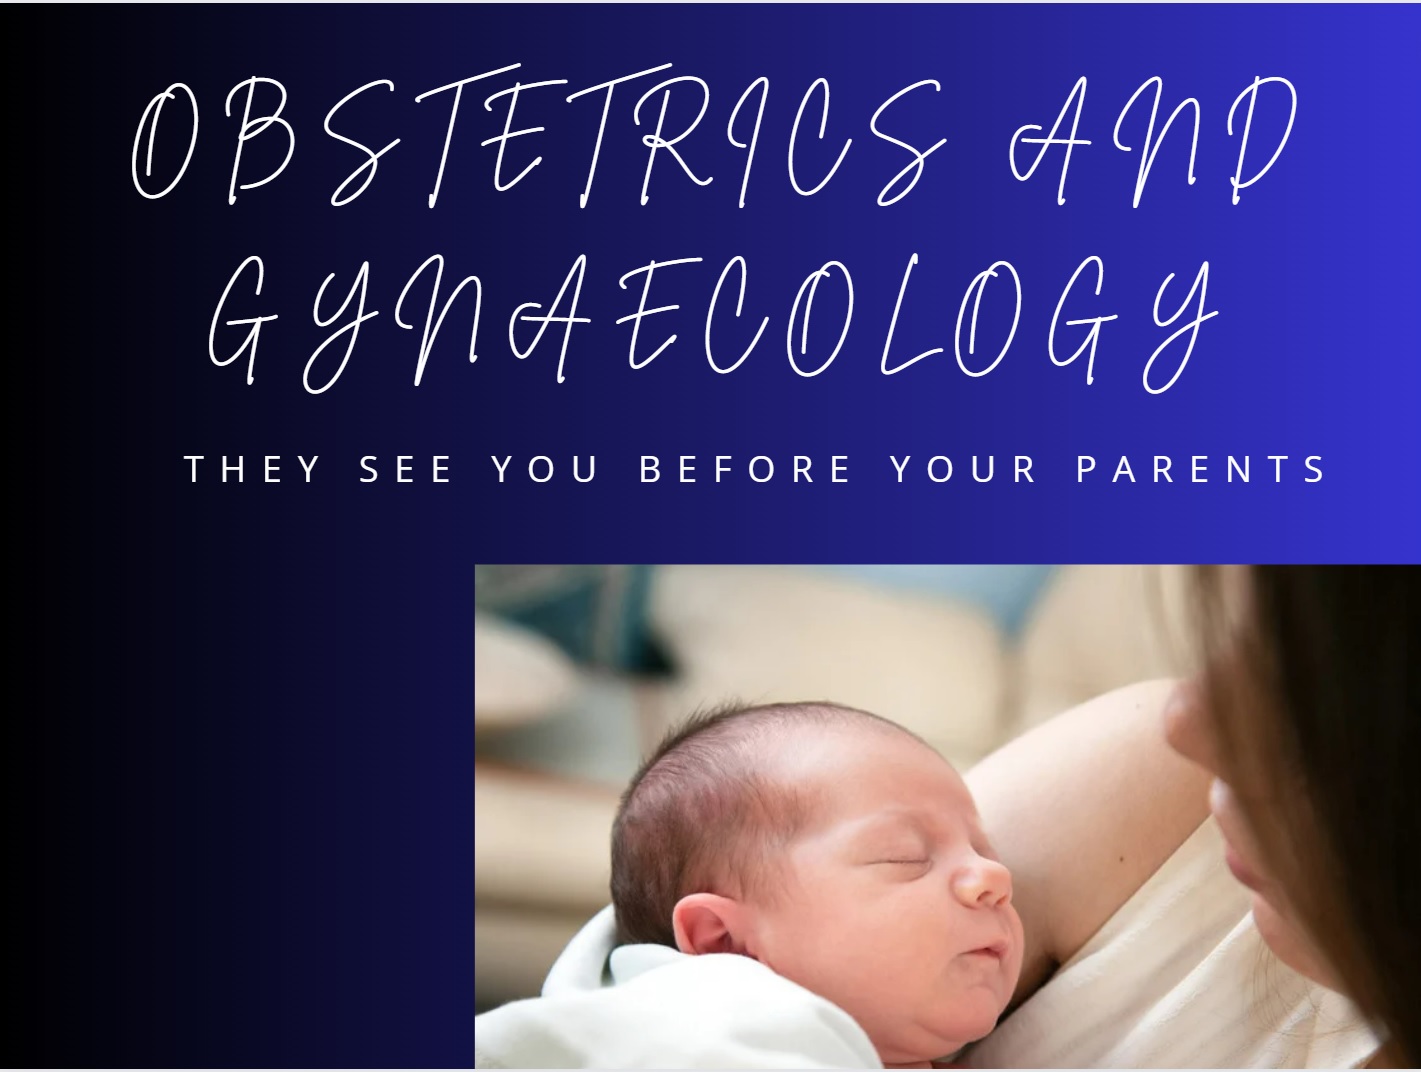 thesis topics for obstetrics and gynaecology 2020